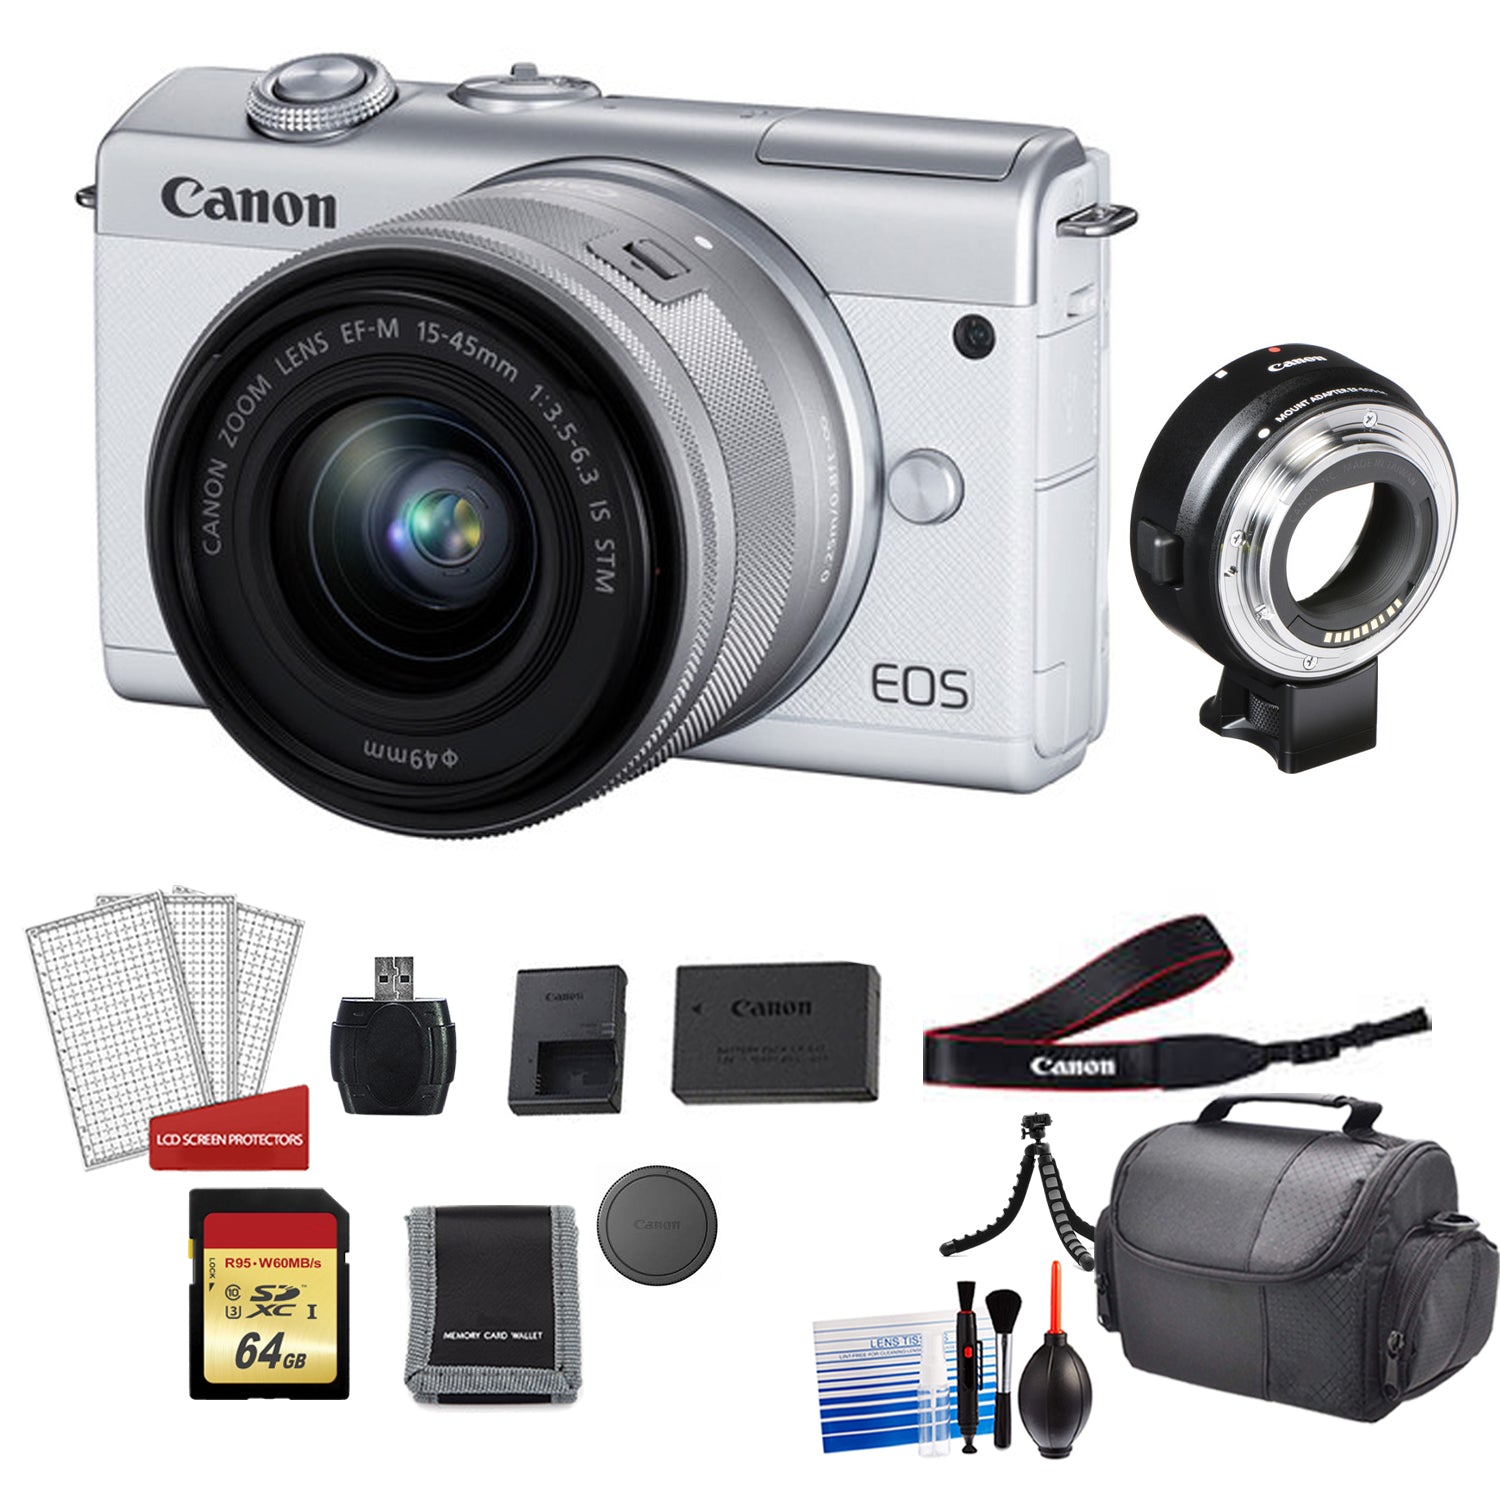 Canon EOS M200 Mirrorless Digital Camera with 15-45mm Lens (White) Kit with Lens Adapter + 64GB Memory Card Bundle